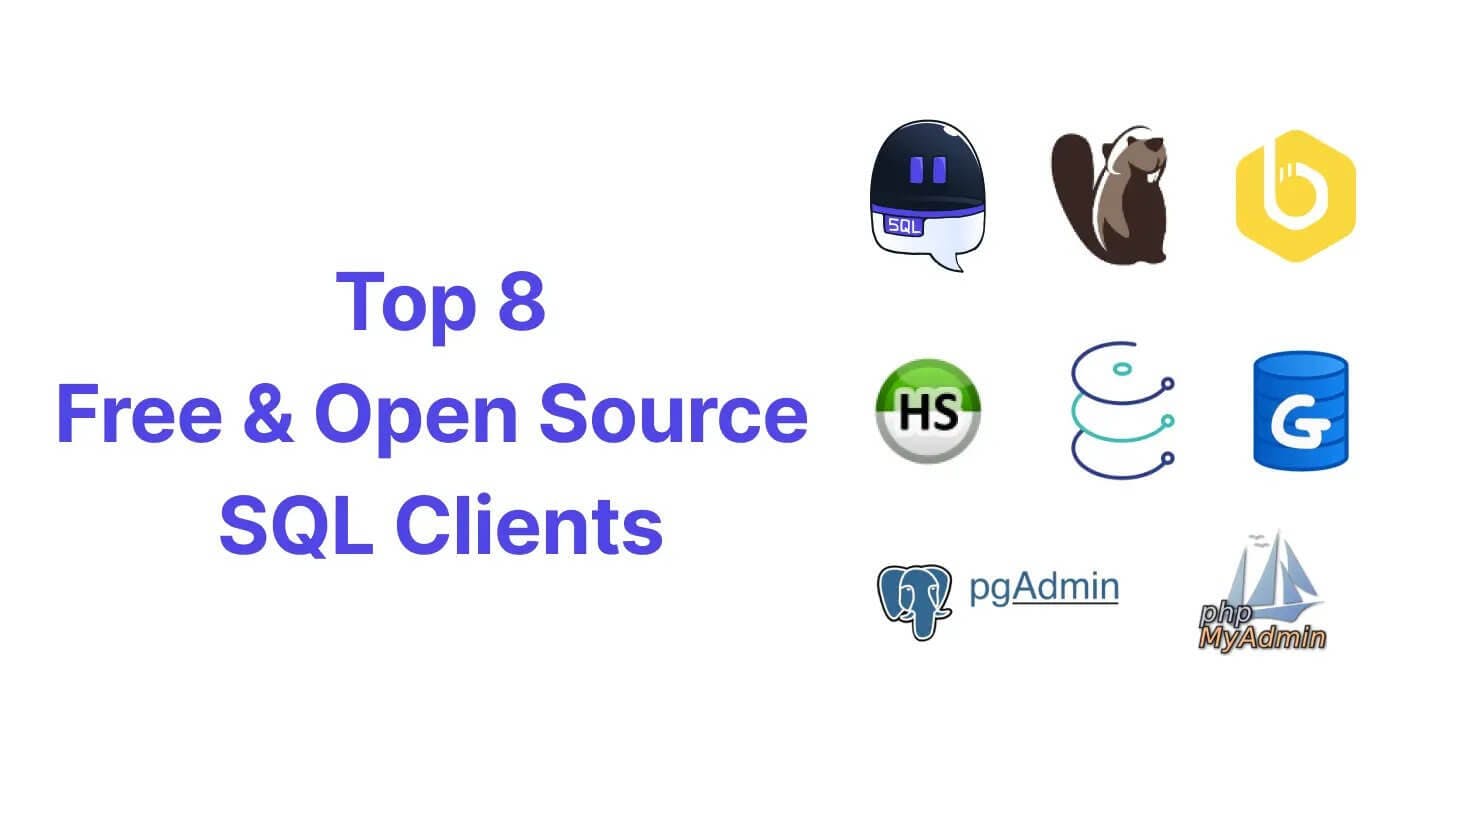 Top 8 Free, Open Source SQL Clients to Make Database Management Easier 2023